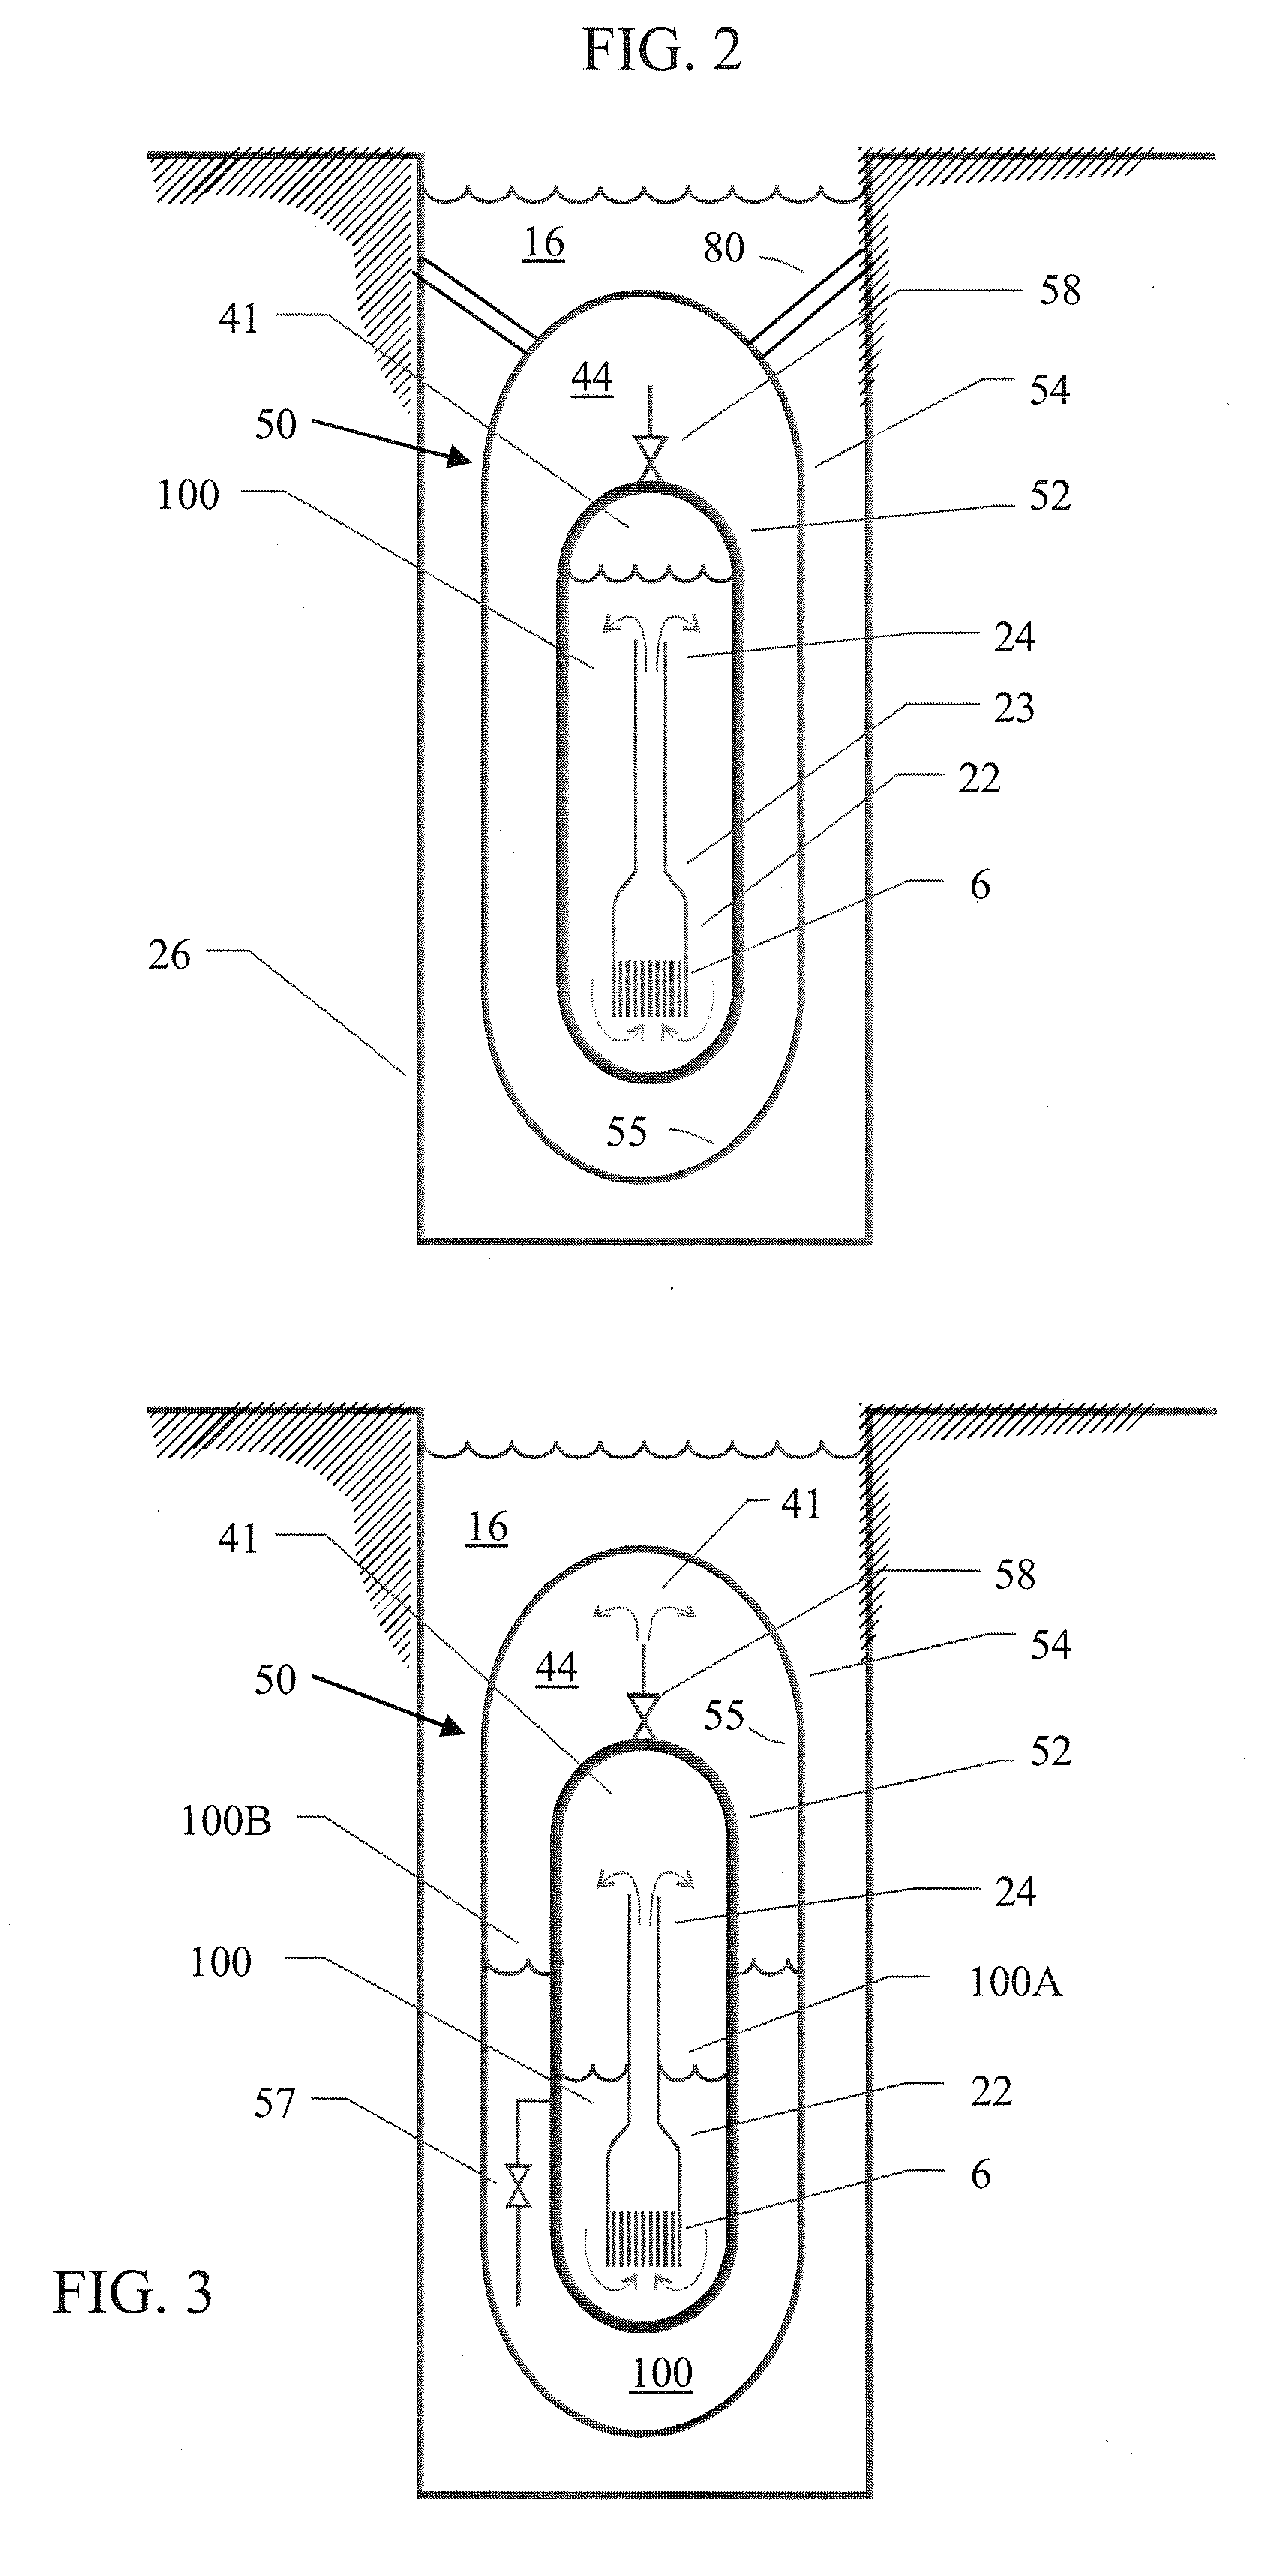 Submerged containment vessel for a nuclear reactor